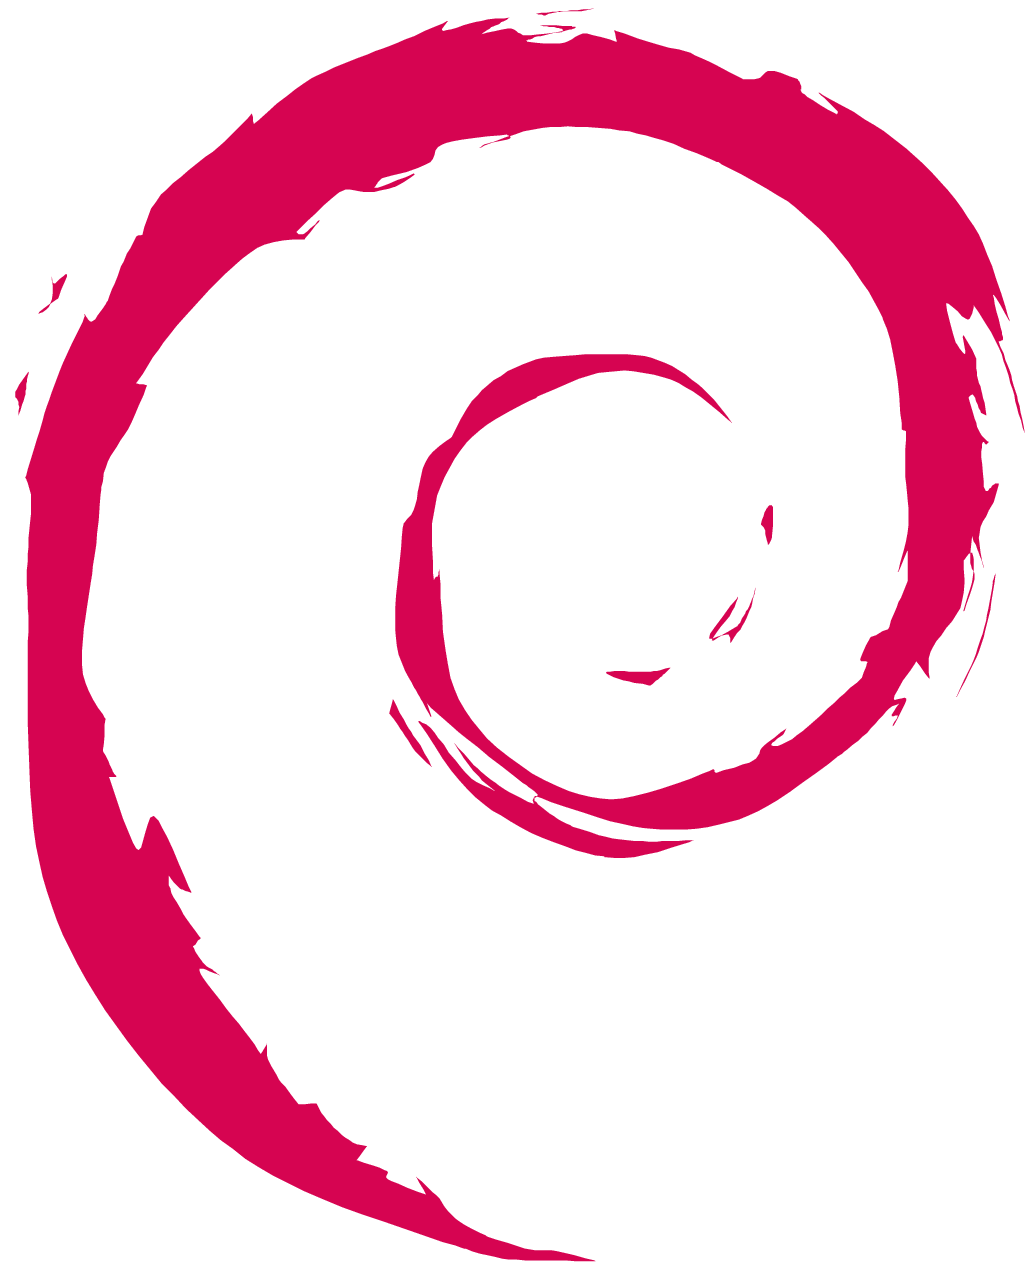 Red and White Swirl Logo - Red Swirl Background. Free Background for Facebook, Google+